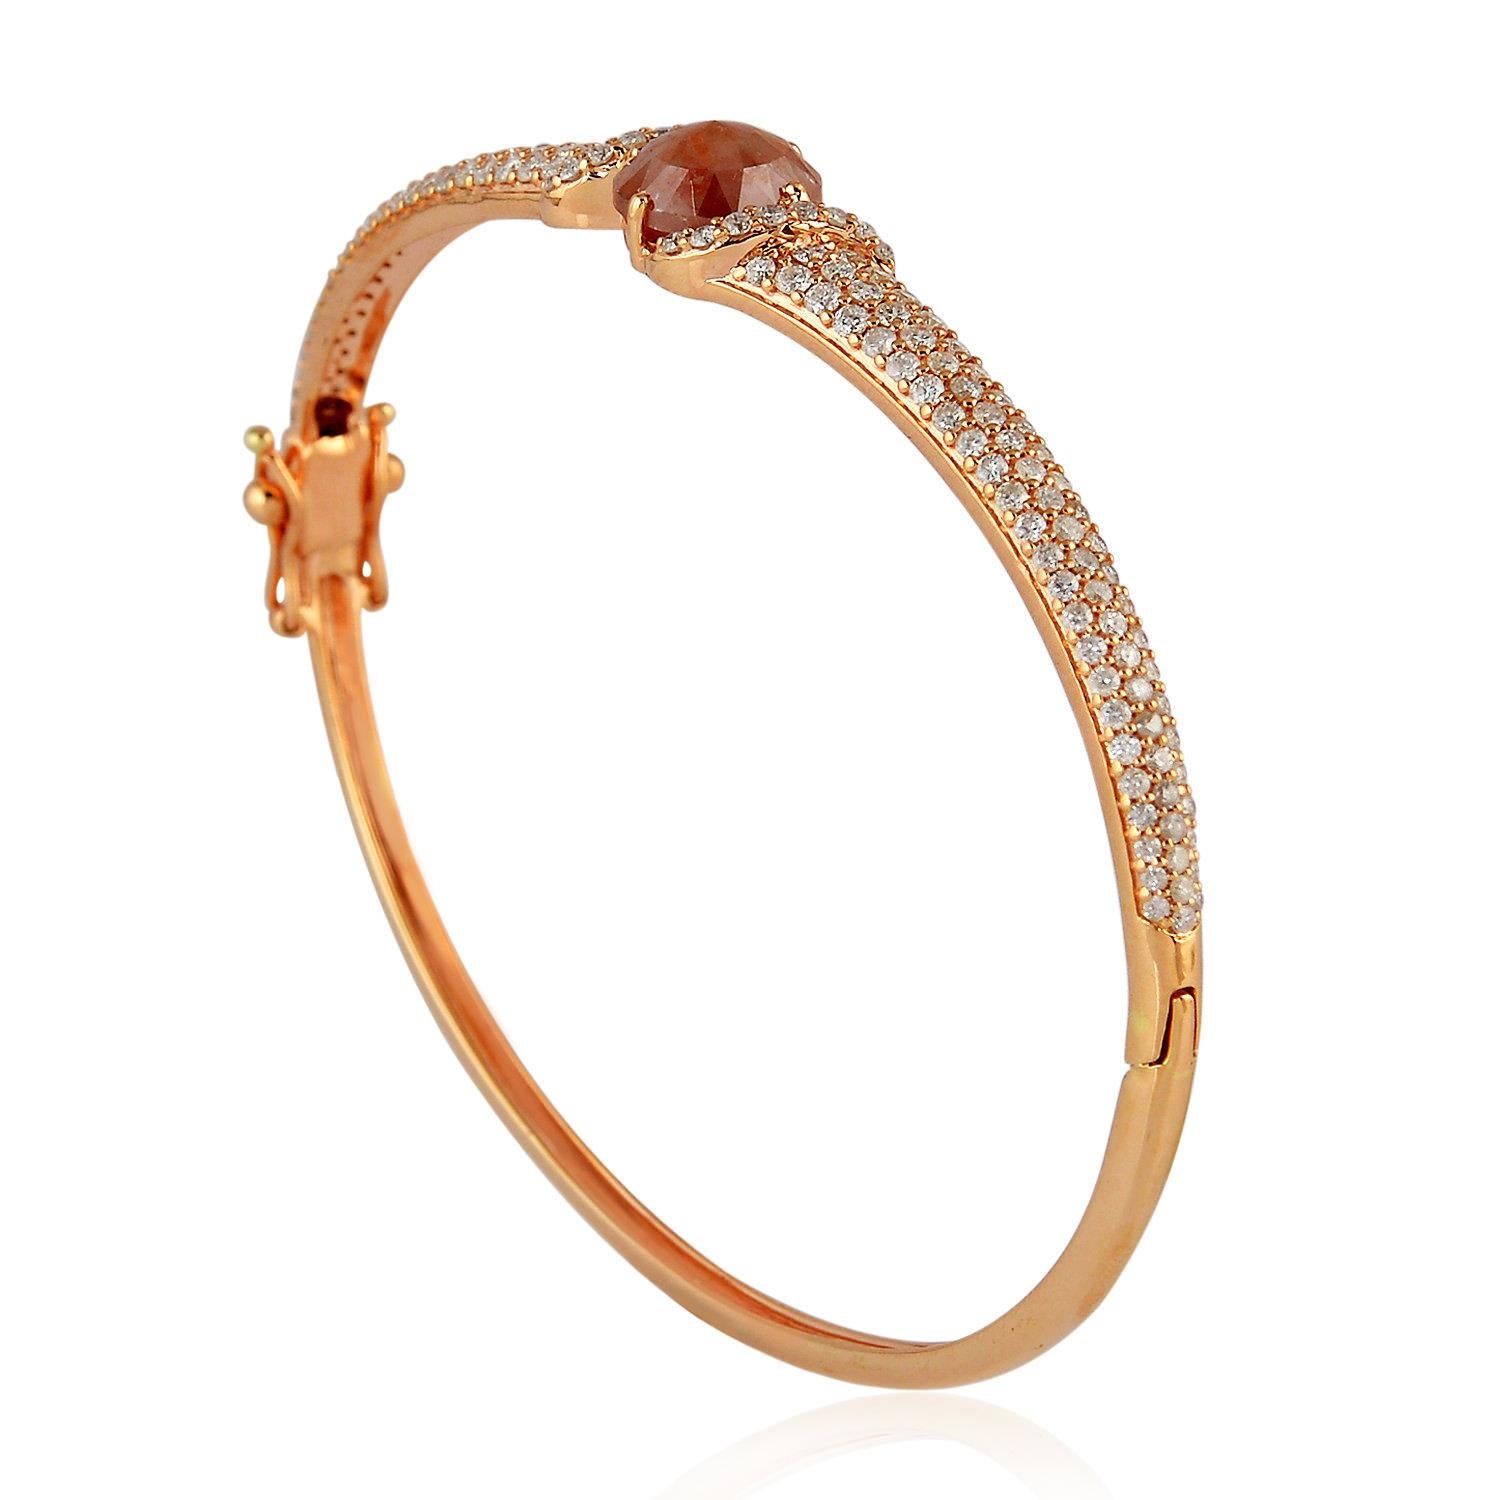 A stunning bangle bracelet handmade in 18K rose gold. It is hand set in 3.55 carats of diamonds. Clasp Closure. 

FOLLOW  MEGHNA JEWELS storefront to view the latest collection & exclusive pieces.  Meghna Jewels is proudly rated as a Top Seller on